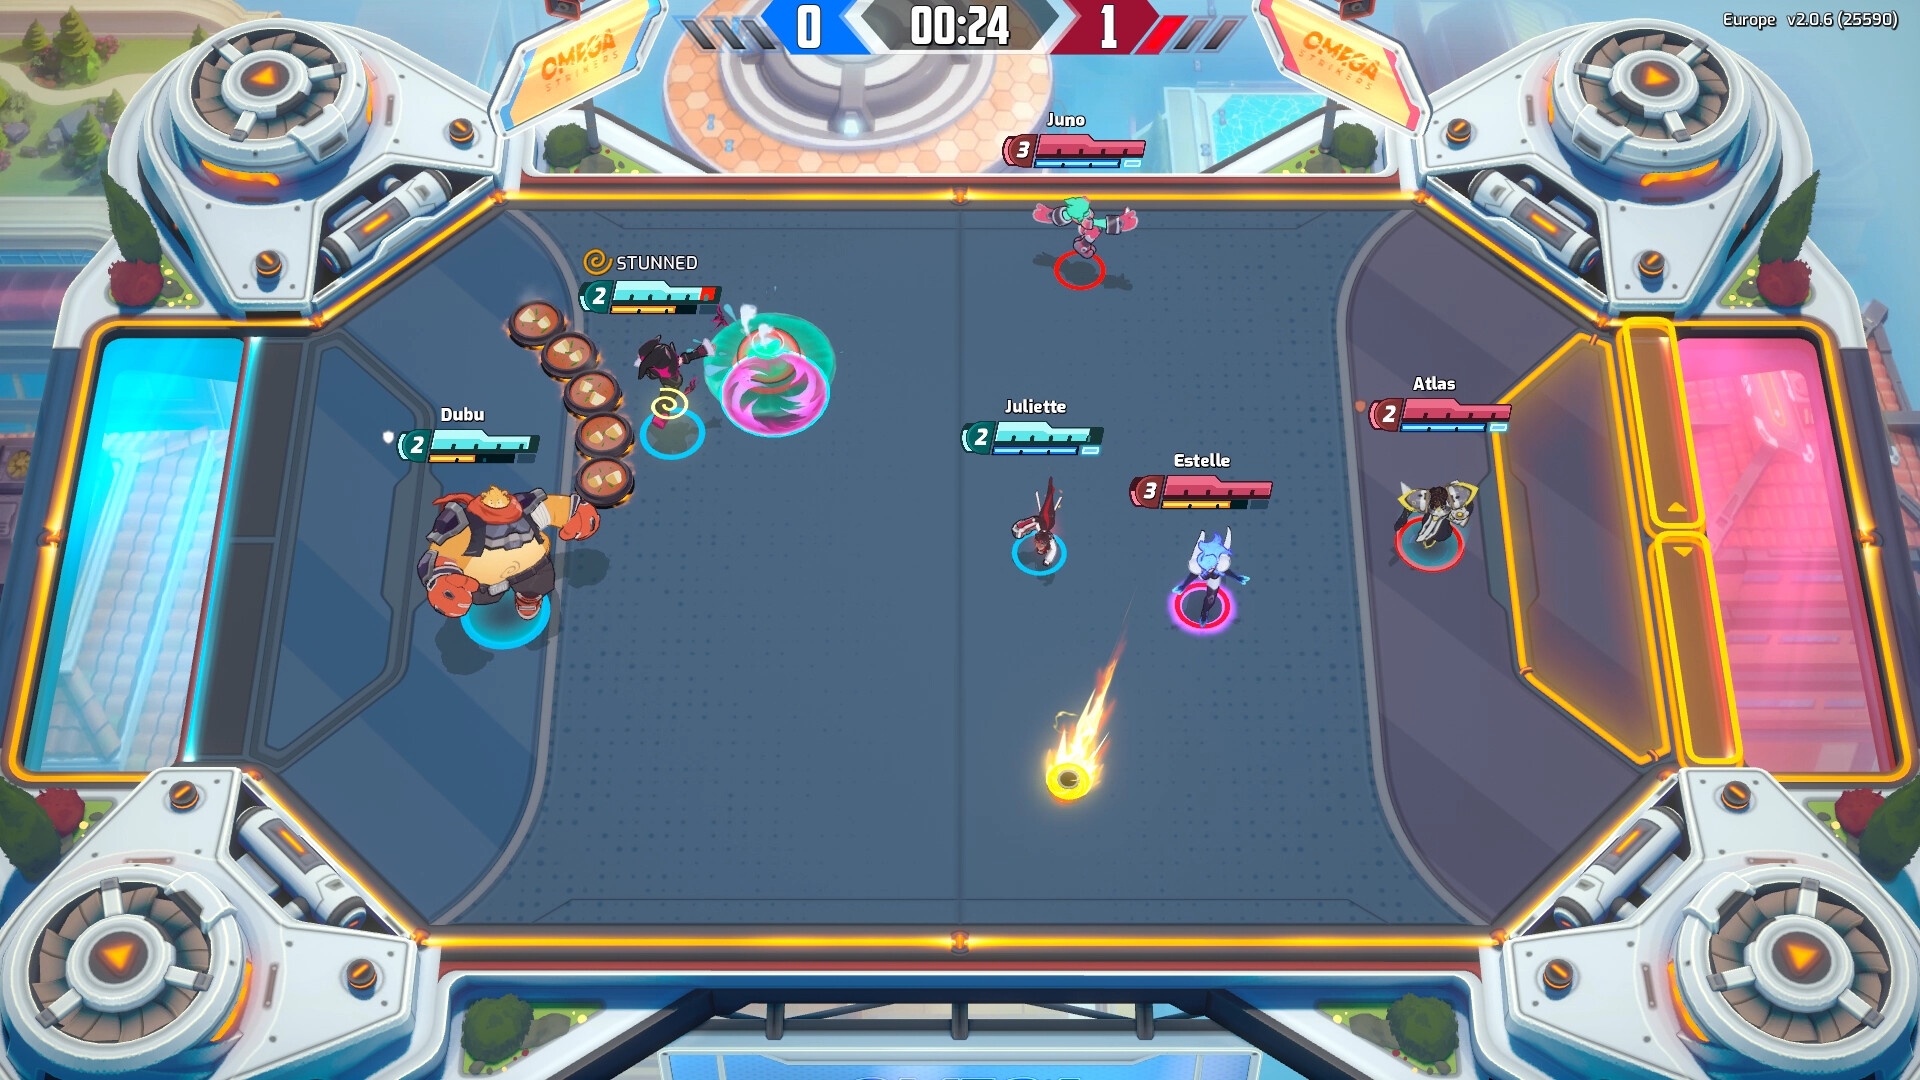 Download and play Omega Strikers on PC with MuMu Player